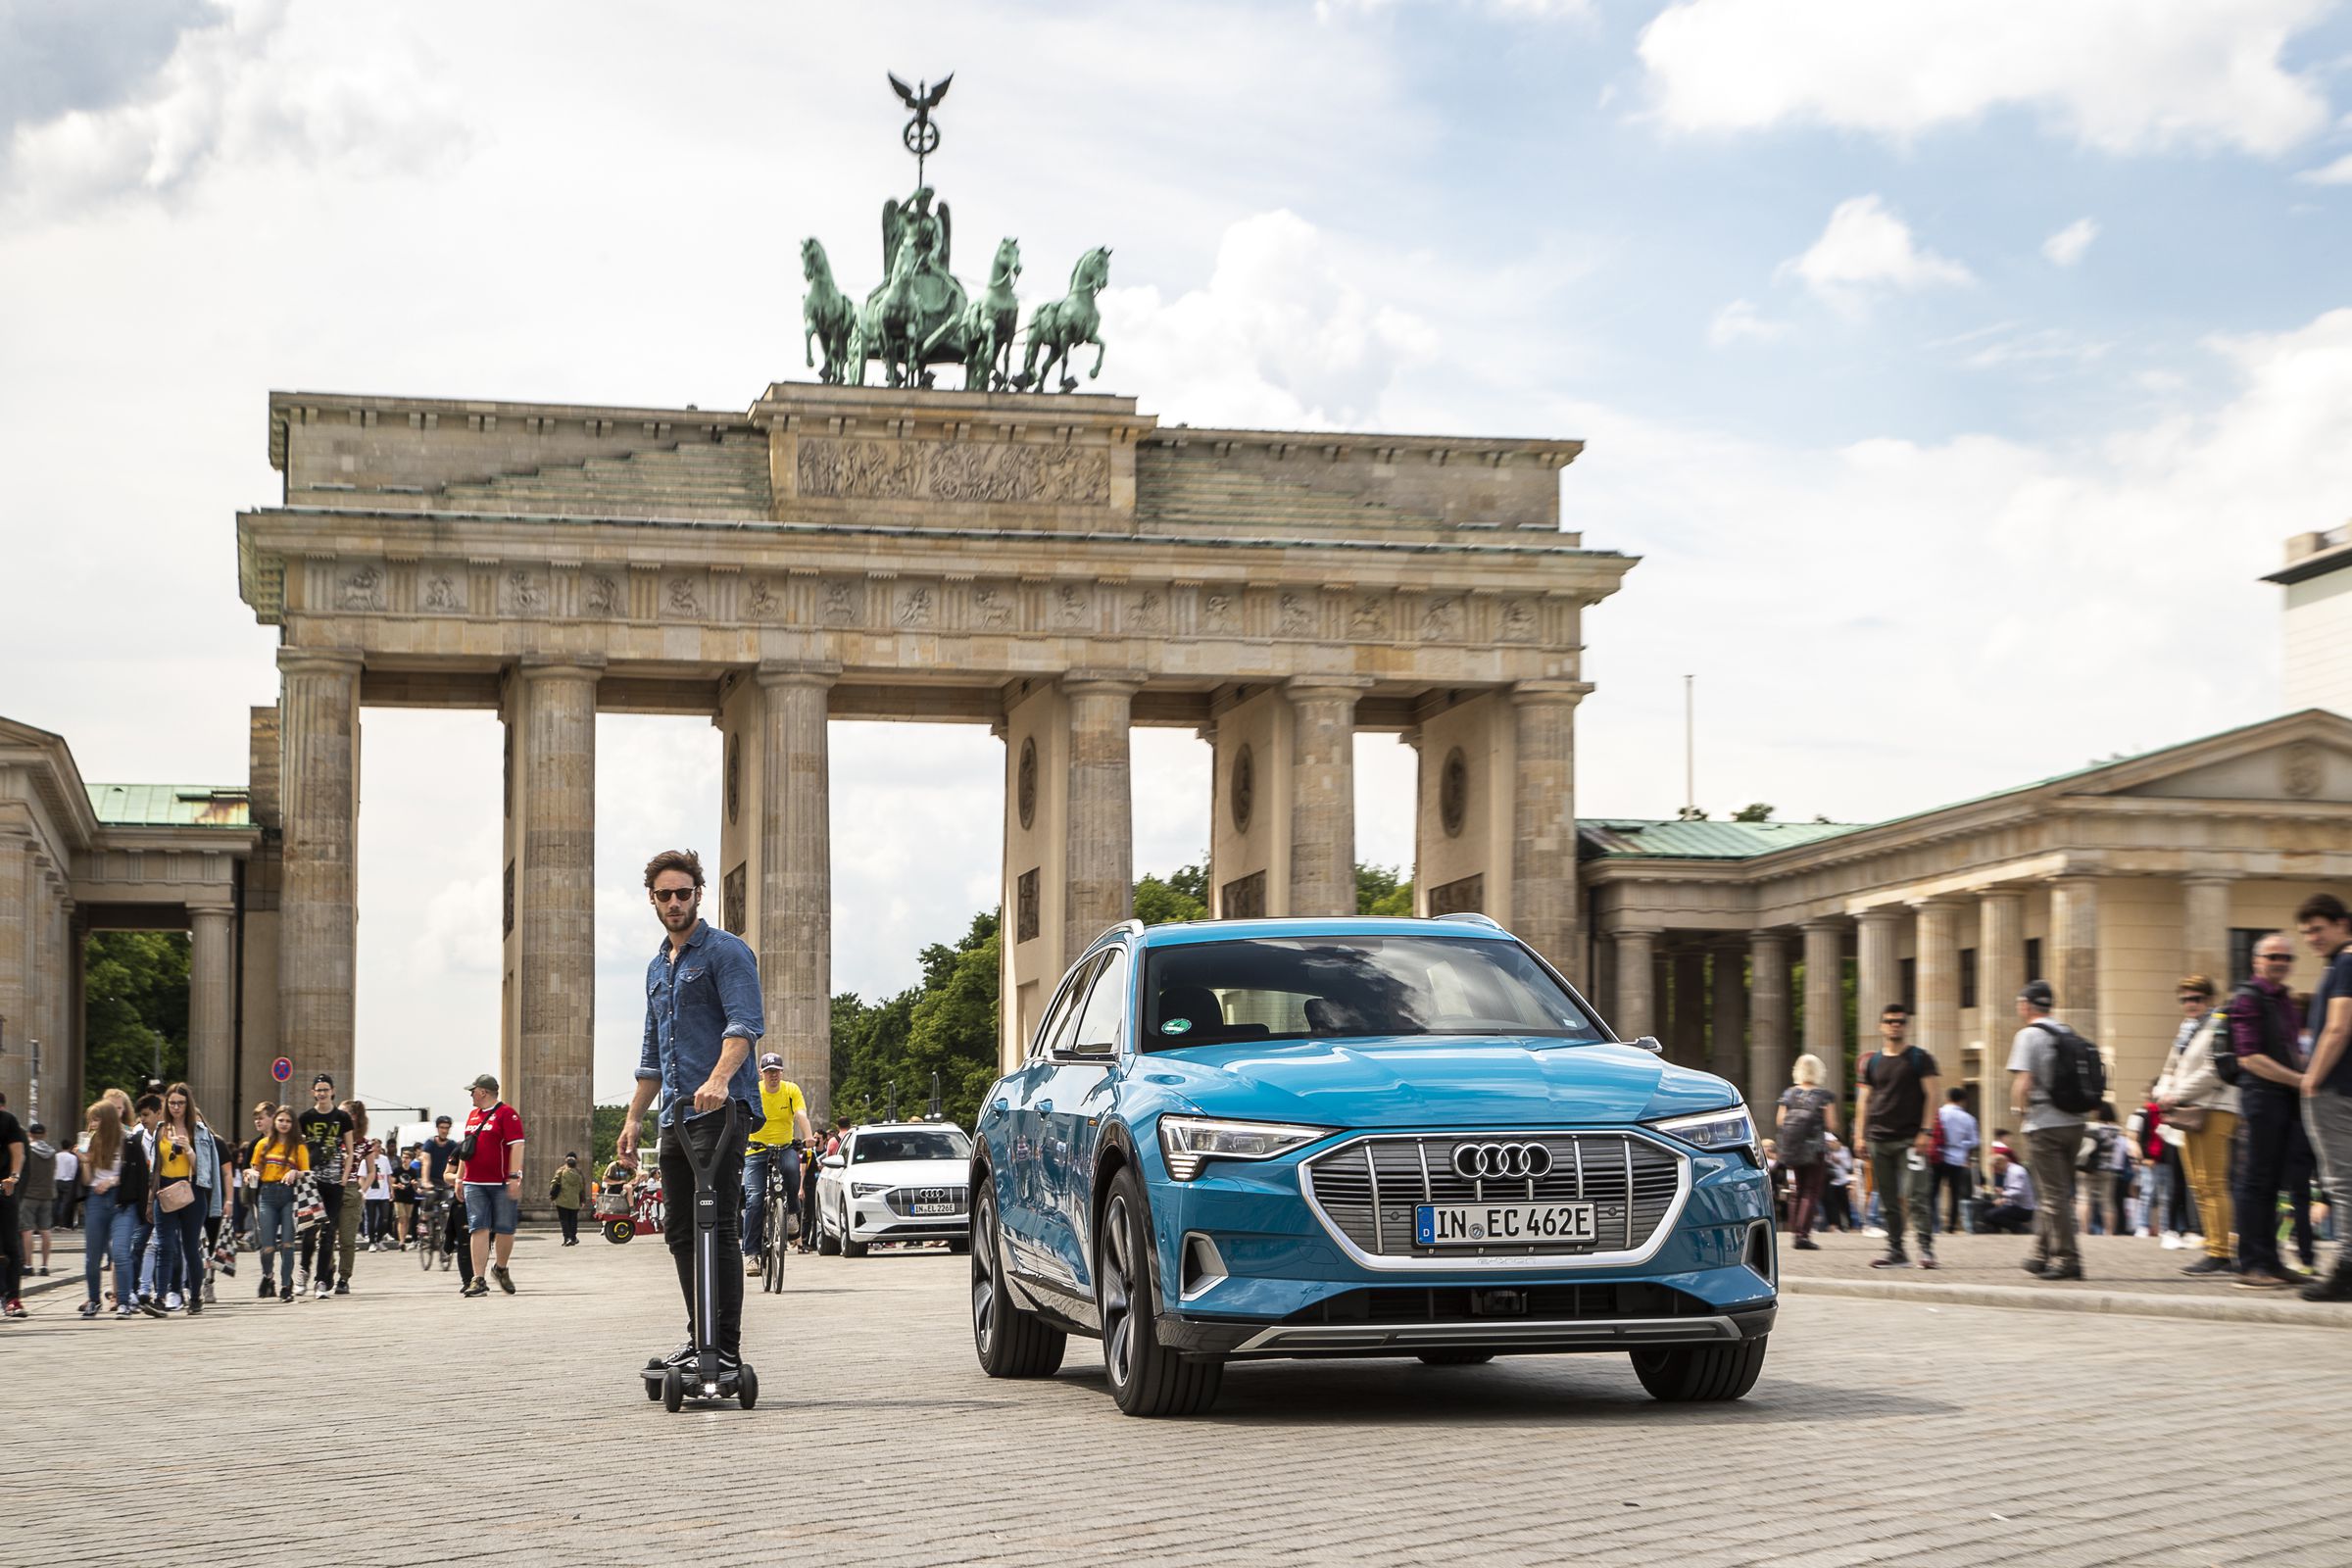 Audi says that you could charge the E-tron scooter in the trunk of your E-tron car.